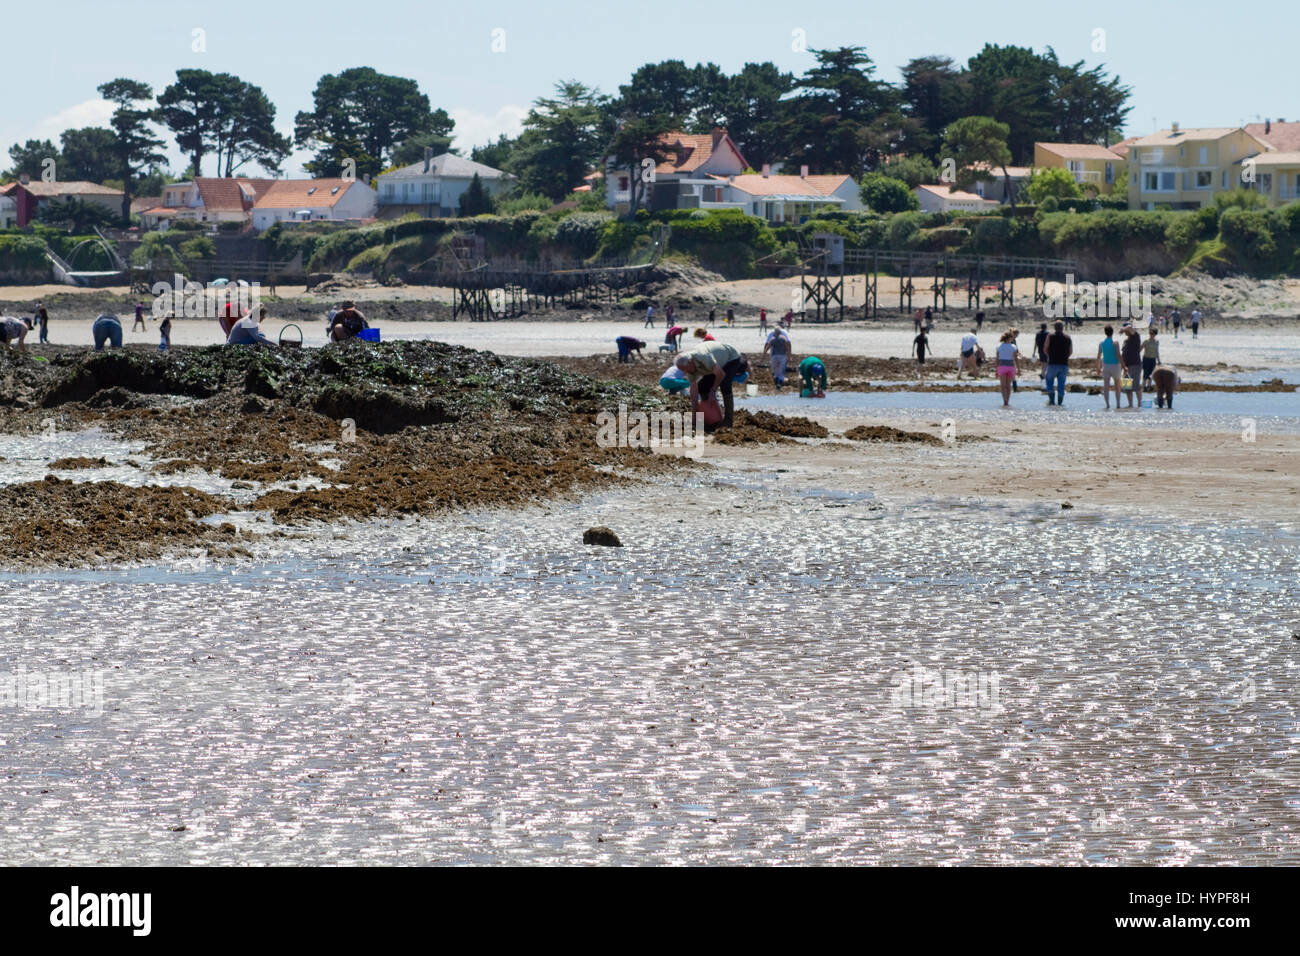 France, North-Western France, La Plaine-sur-Mer, Port Giraud, gathering seafood by hand Stock Photo